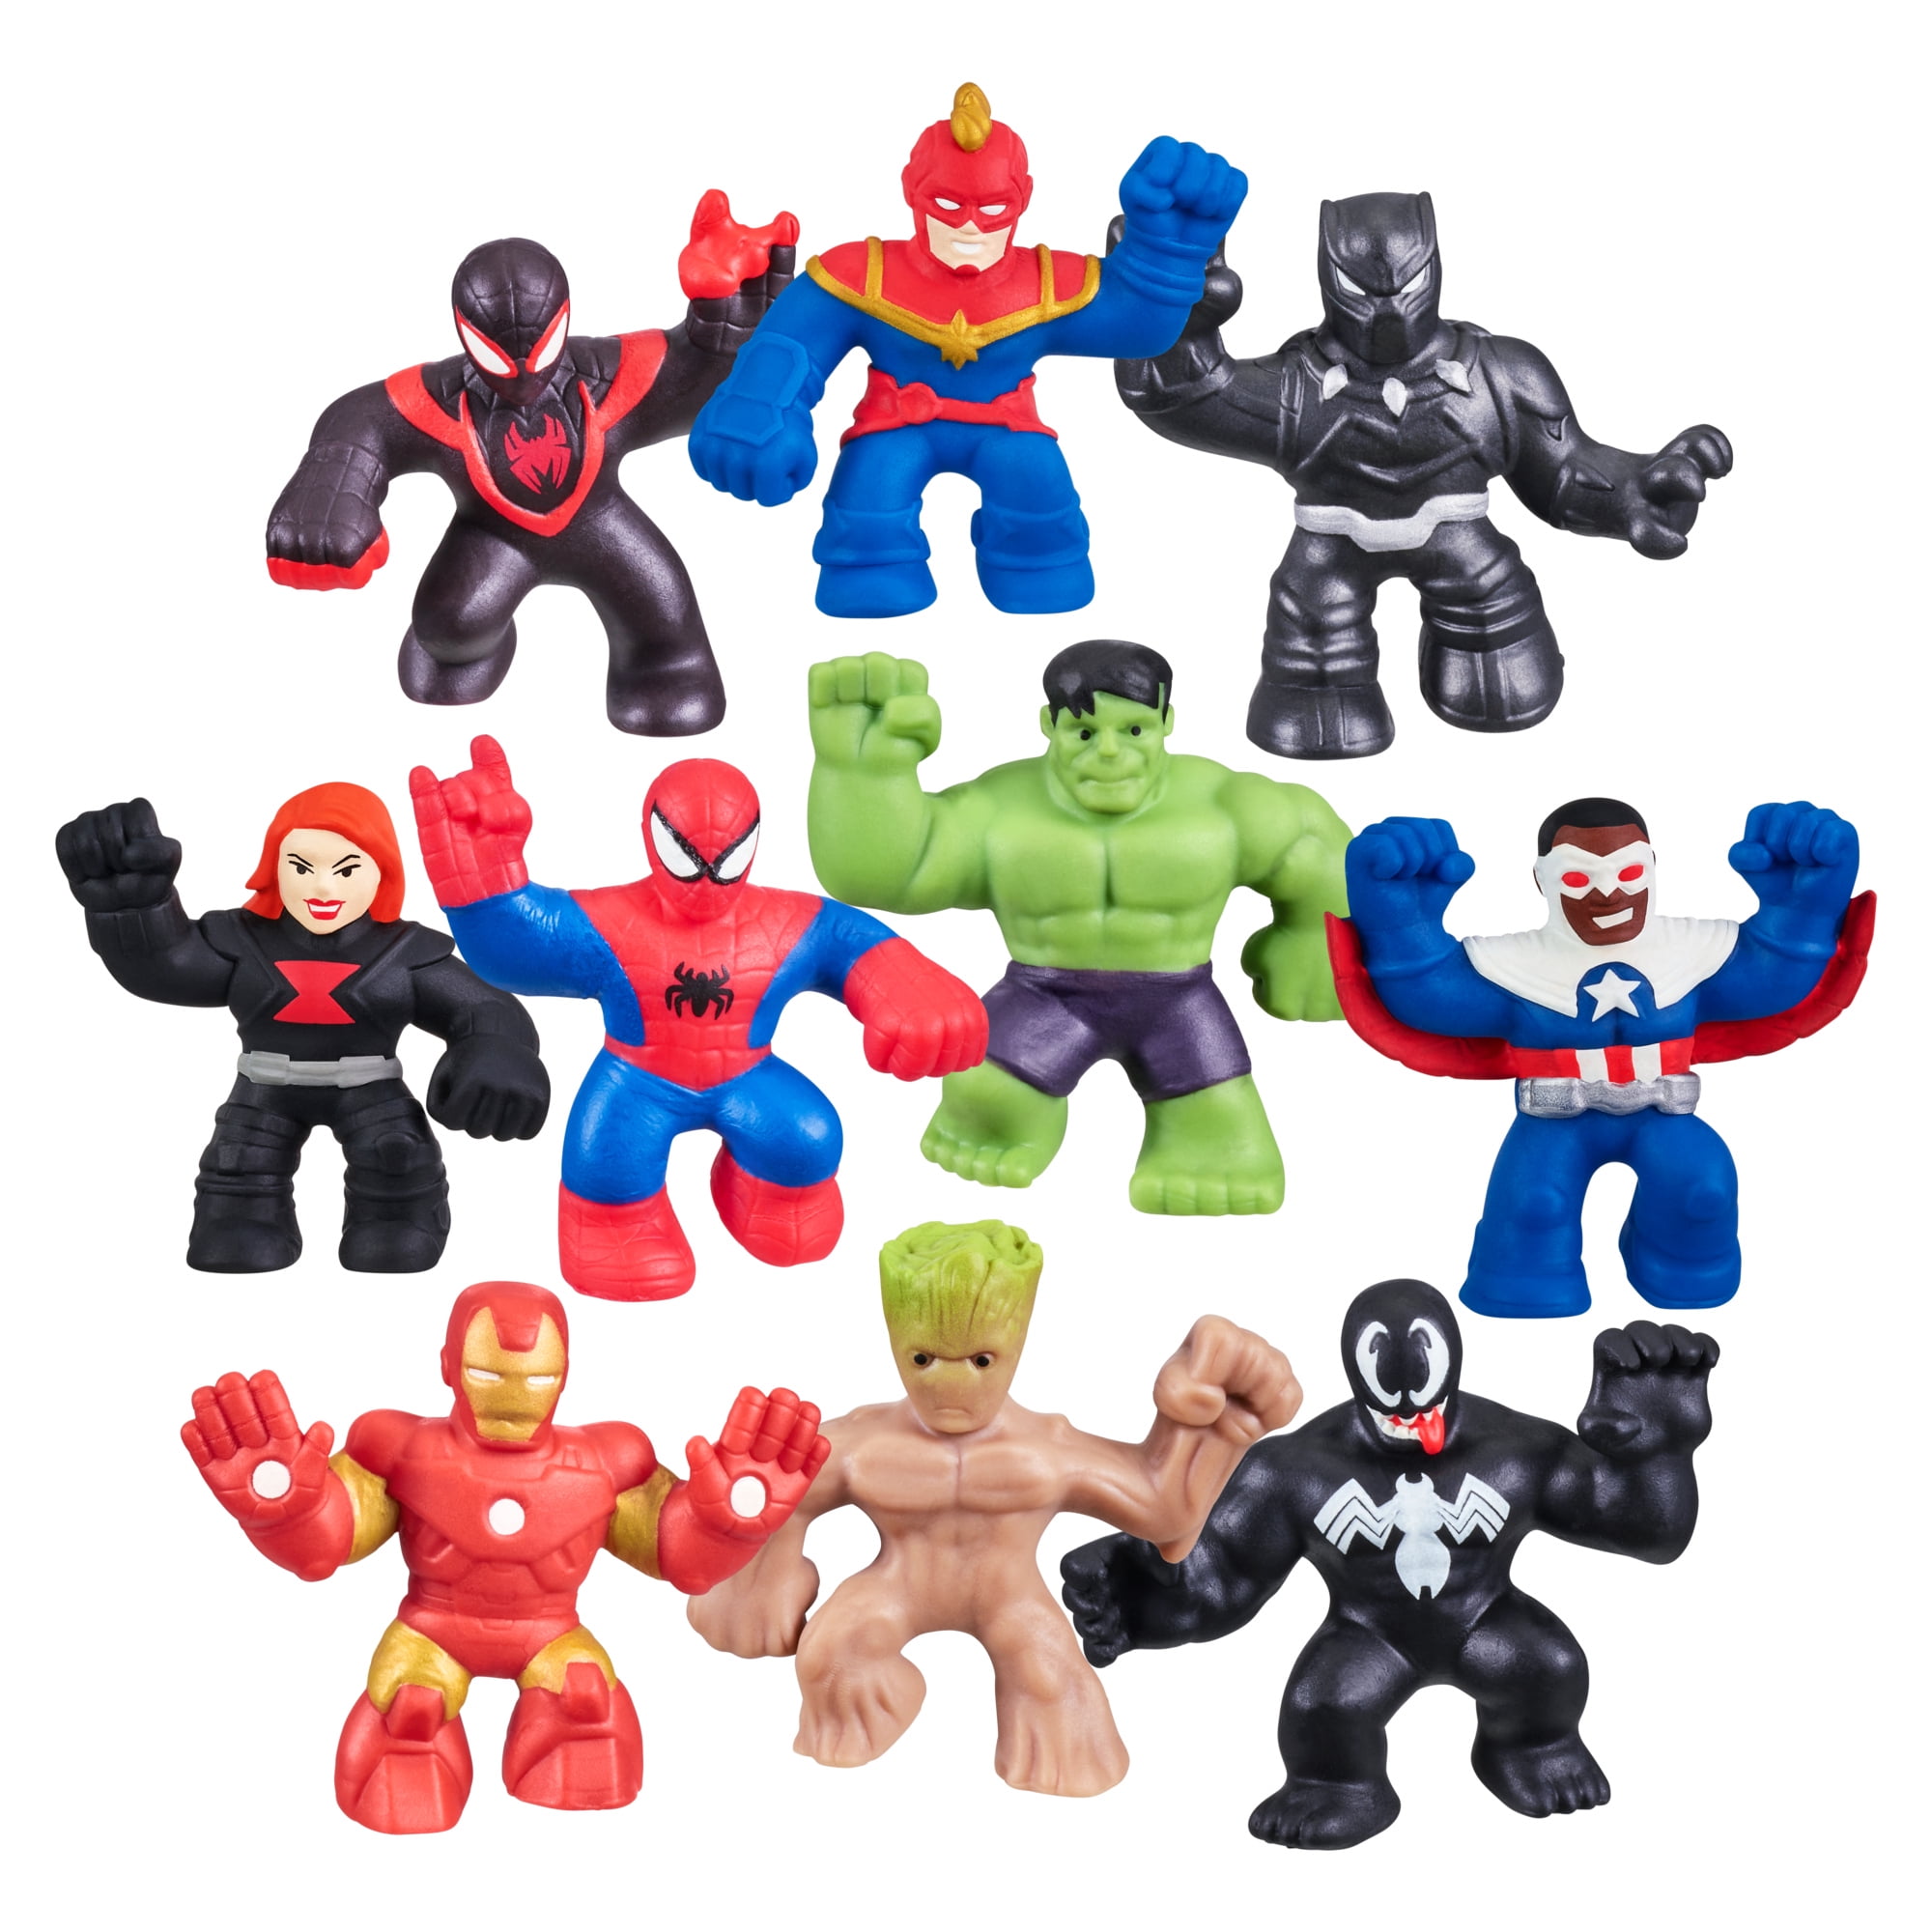 Heroes of Goo Jit Zu, Marvel Minis, Squishy, Stretchy, Gooey Mini Marvel Heroes 2.5" Tall, Colors and Styles May Vary, Boys, Ages 4+